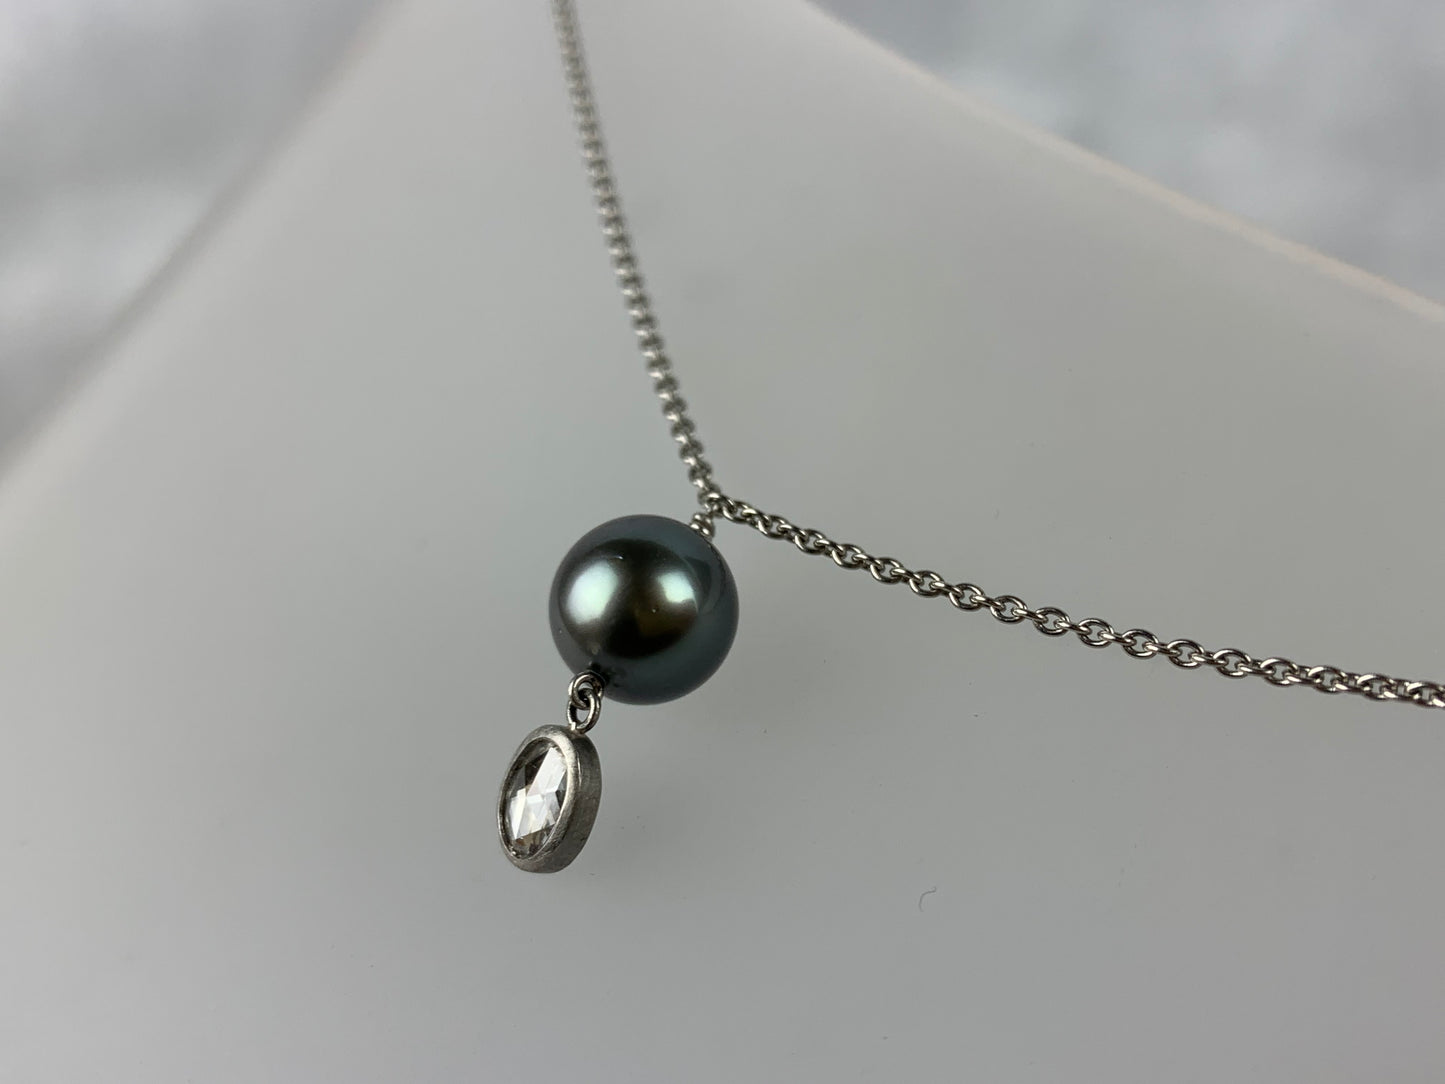 Betts, Malcolm - Platinum Necklace with Tahitian Pearl and Diamond